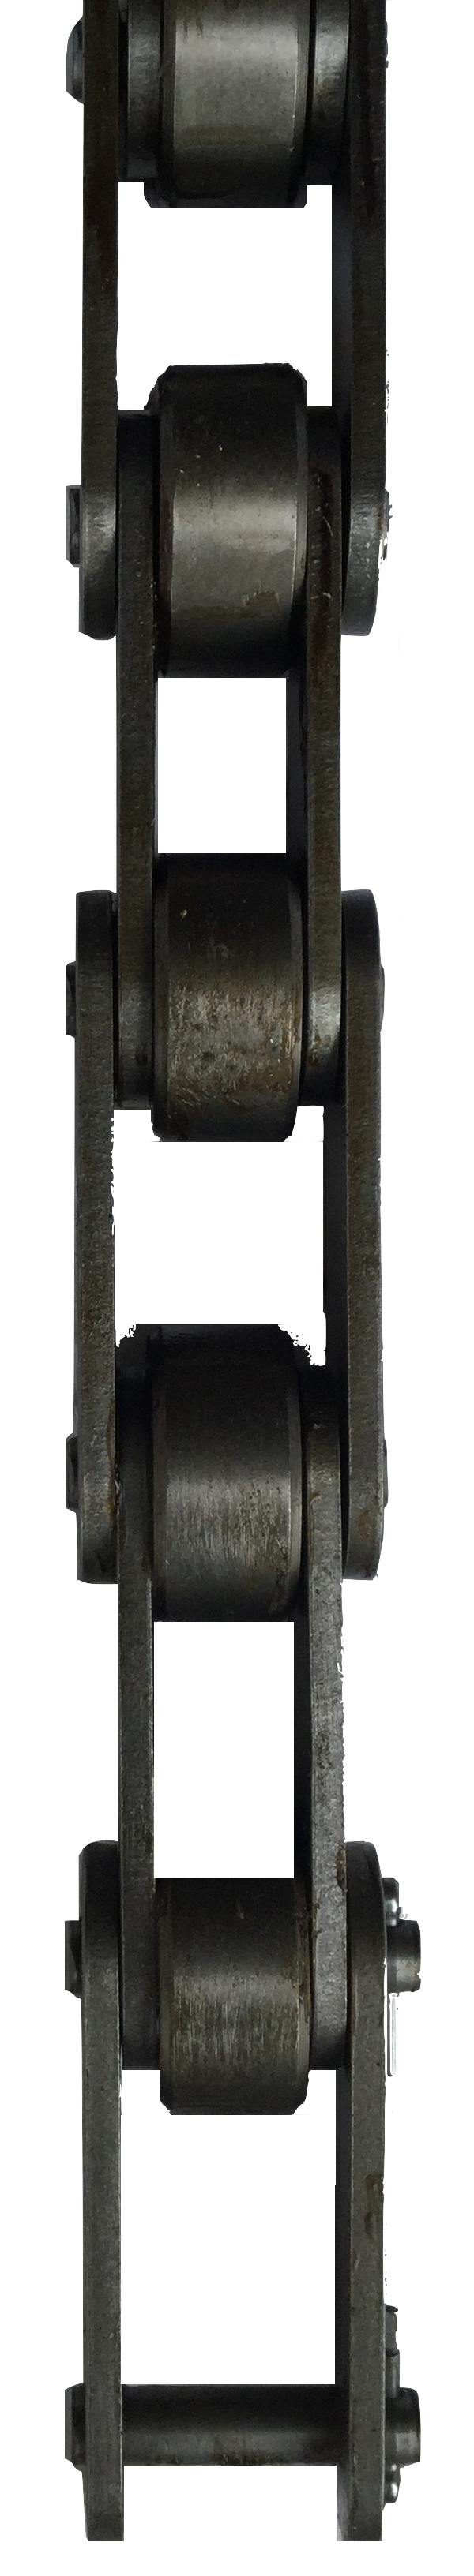 HKK C2100 Double Pitch Riveted Roller Chain (2.500" Pitch) - SOLD BY THE FOOT - Froedge Machine & Supply Co., Inc.